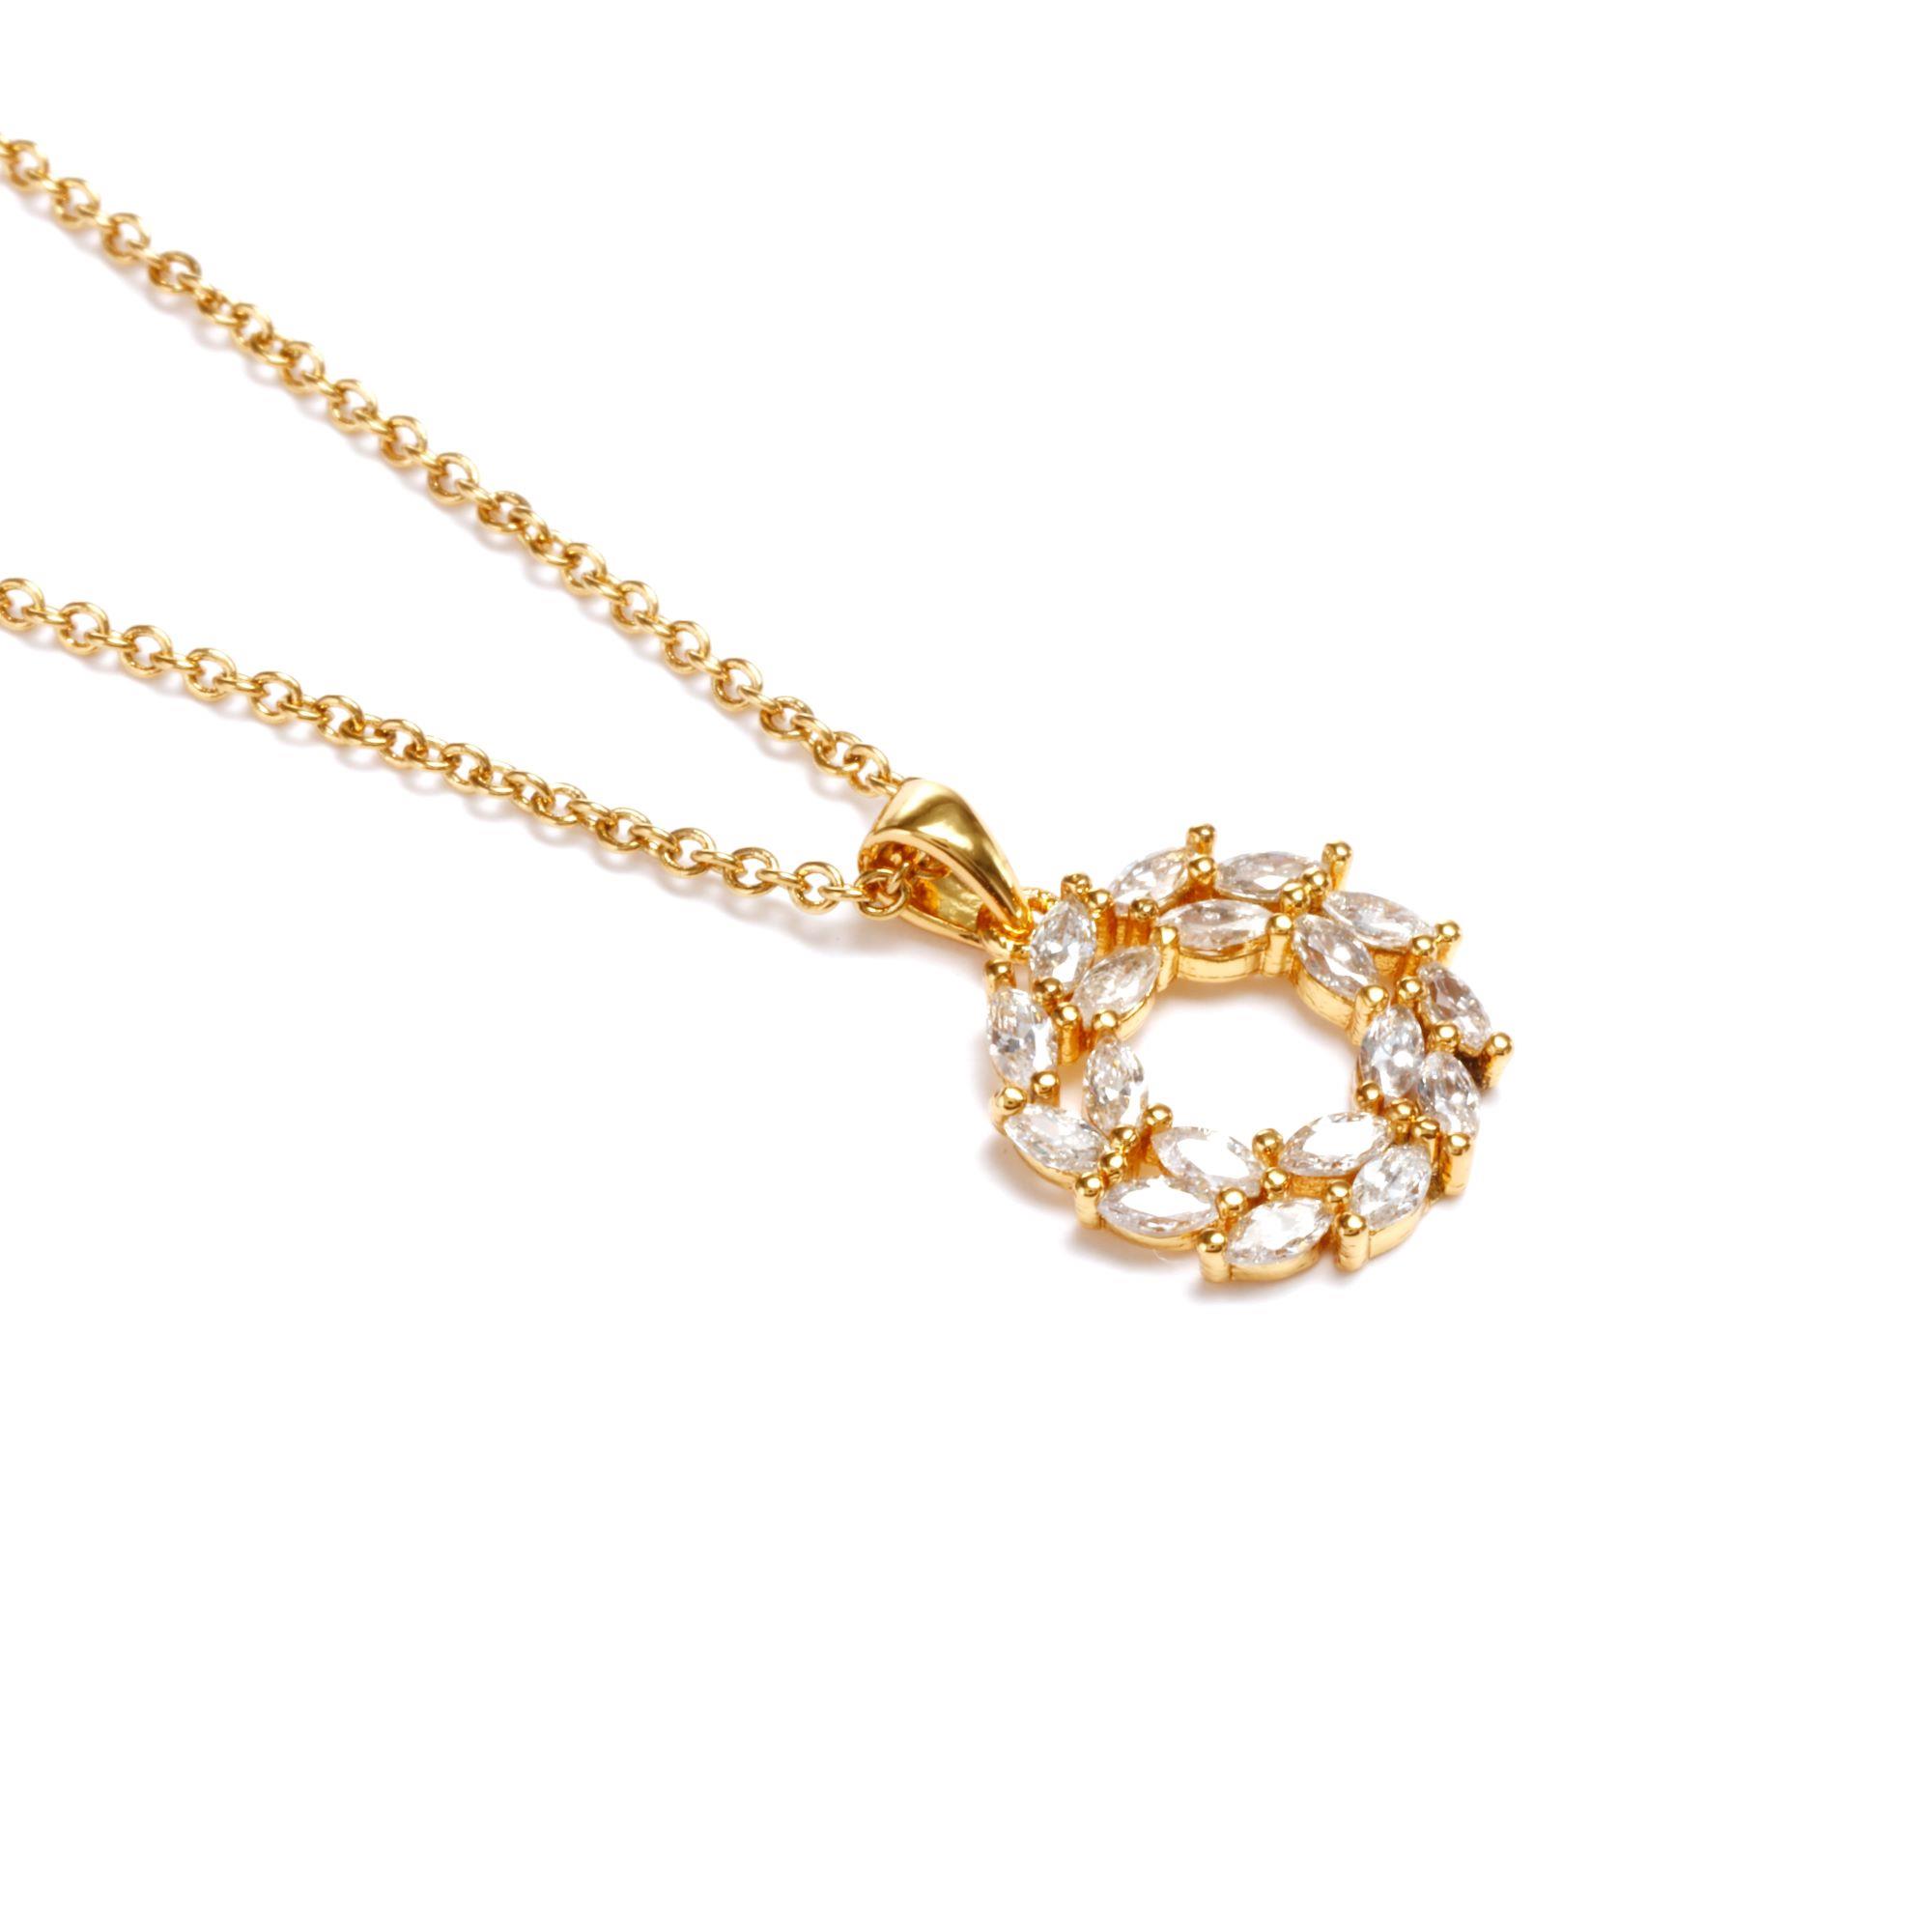 Necklace goldplated, RMB 499.00